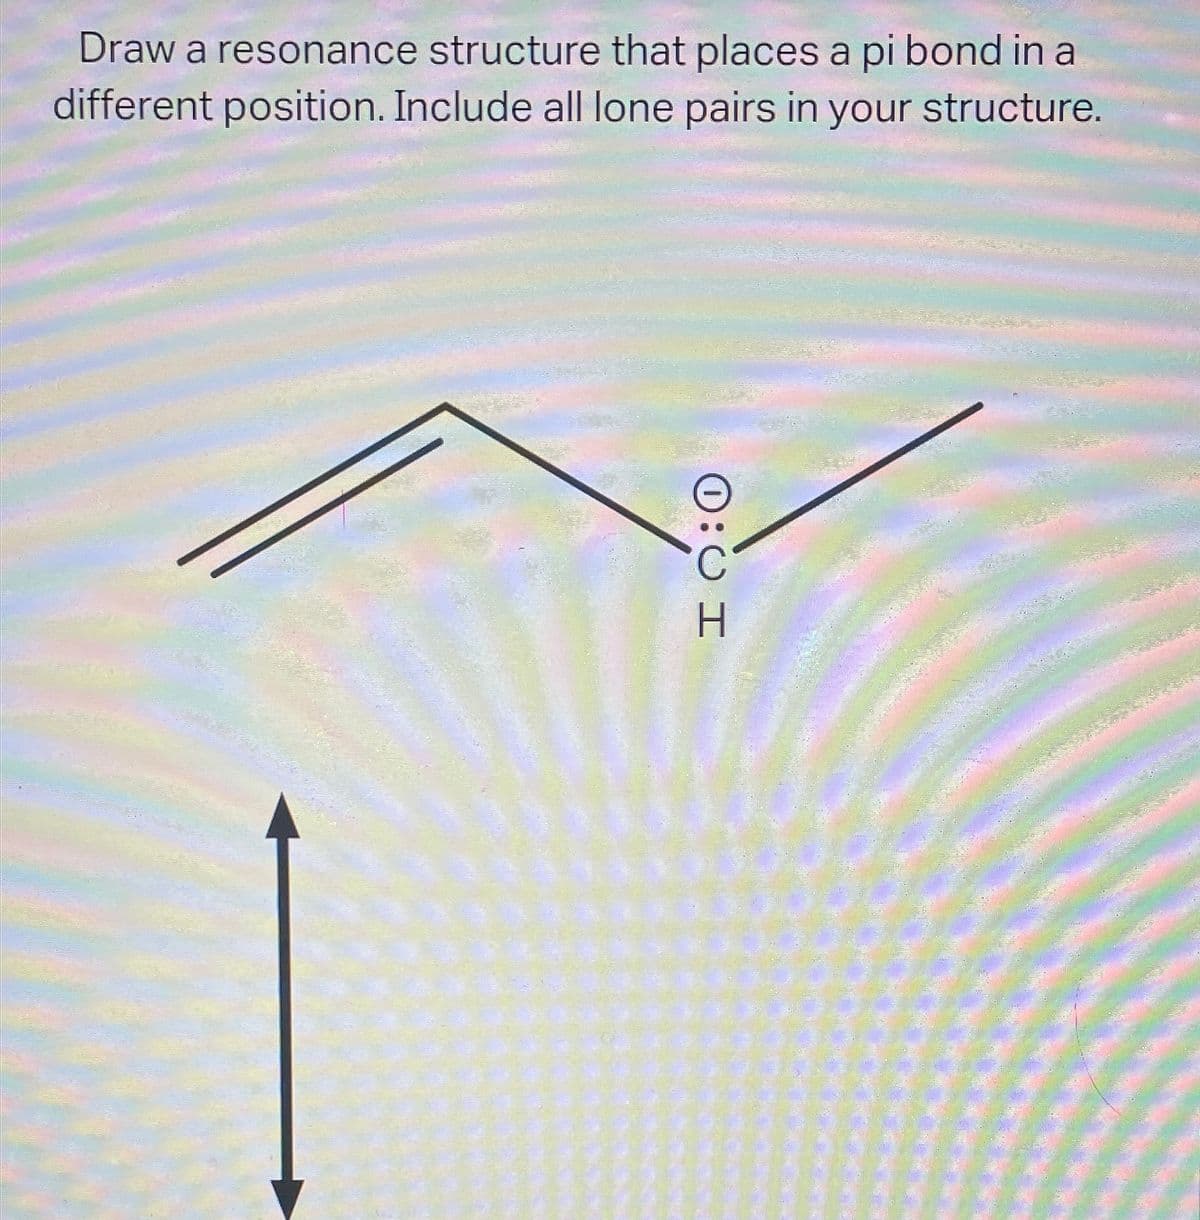 Draw a resonance structure that places a pi bond in a
different position. Include al| lone pairs in your structure.
0:0 I
